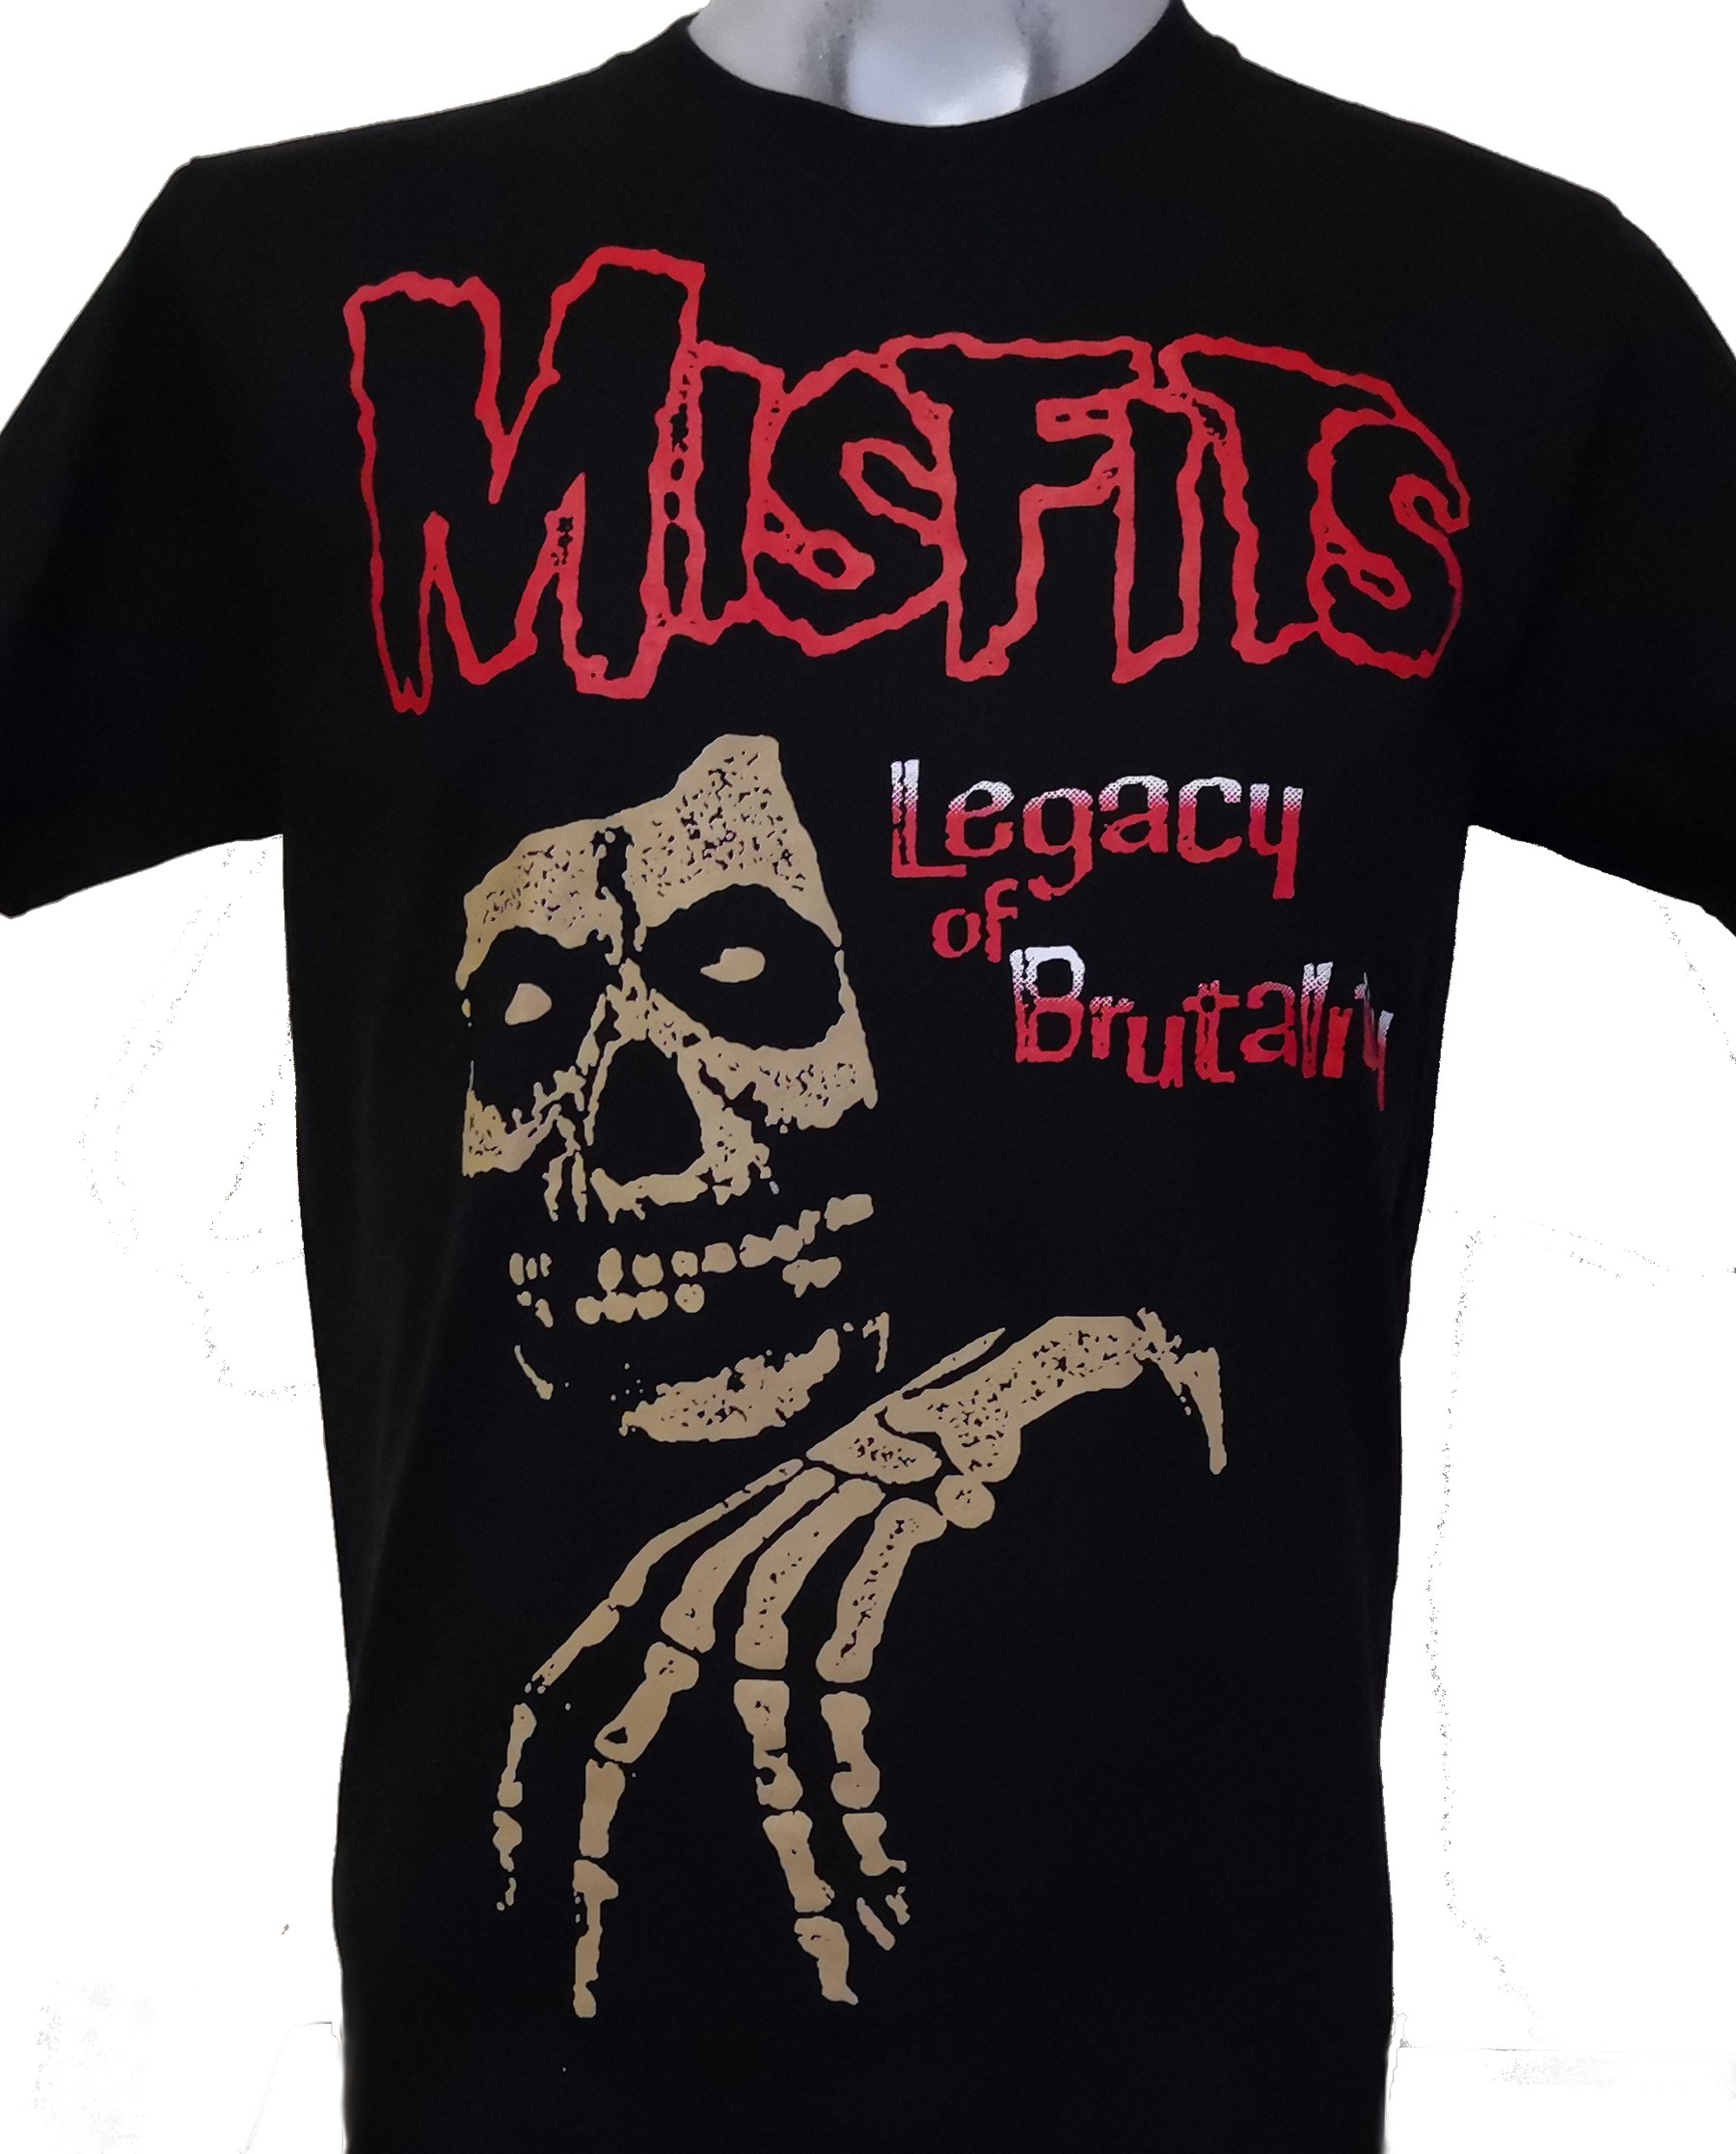 Buy > misfits legacy of brutality shirt > in stock